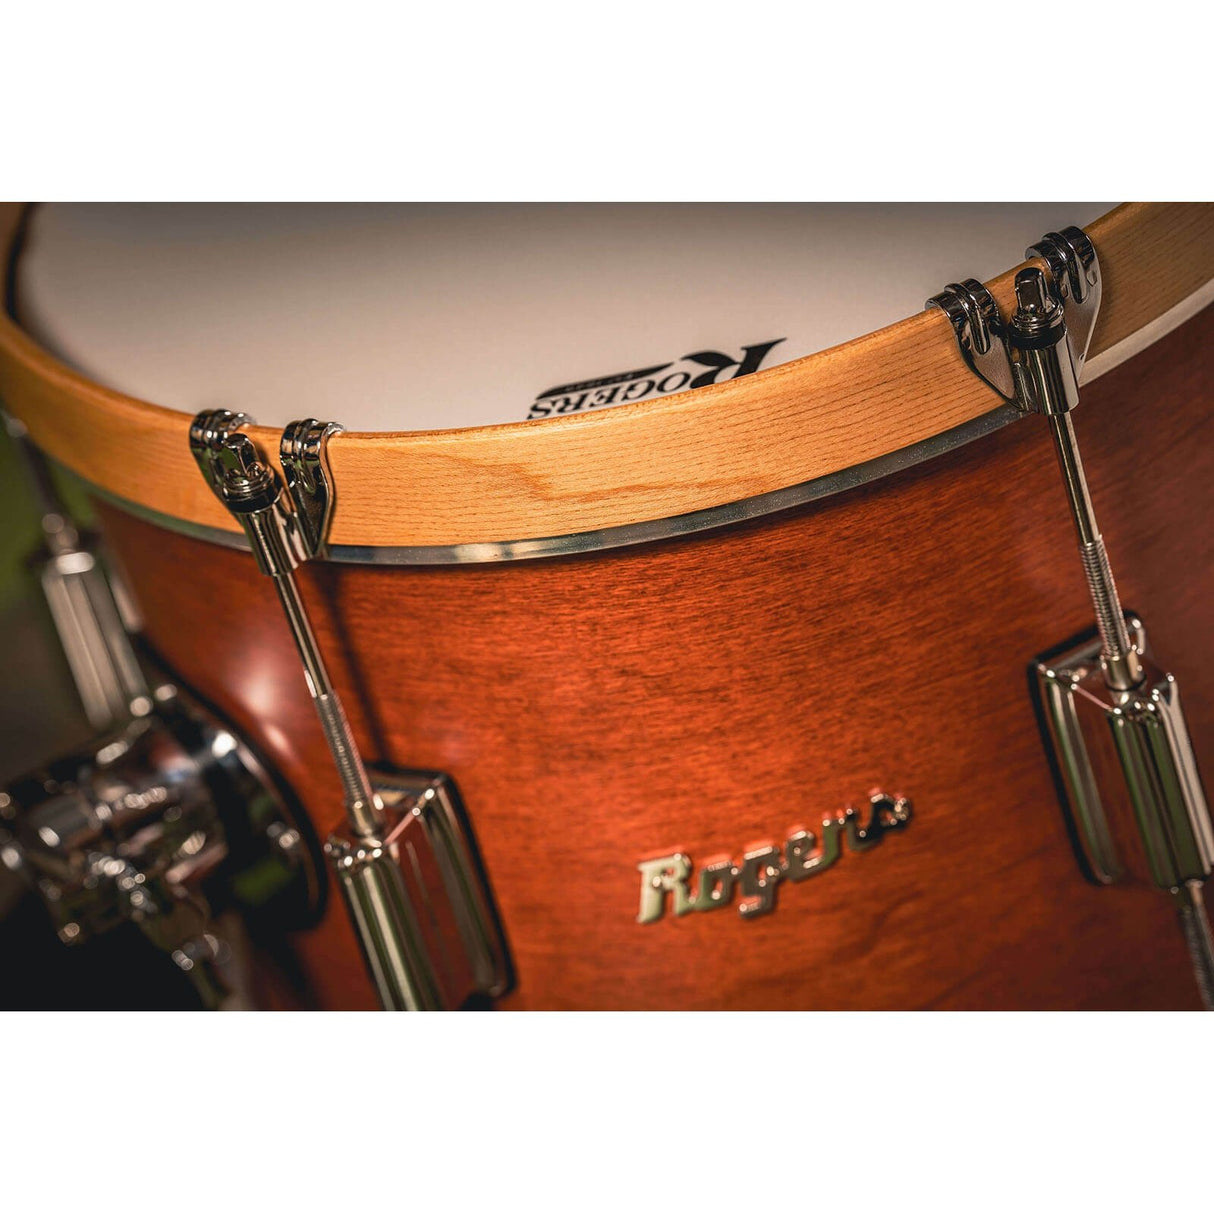 Rogers Tower Wood Hoop 3pc Drum Set Satin Red Mahogany - Drum Center Of Portsmouth